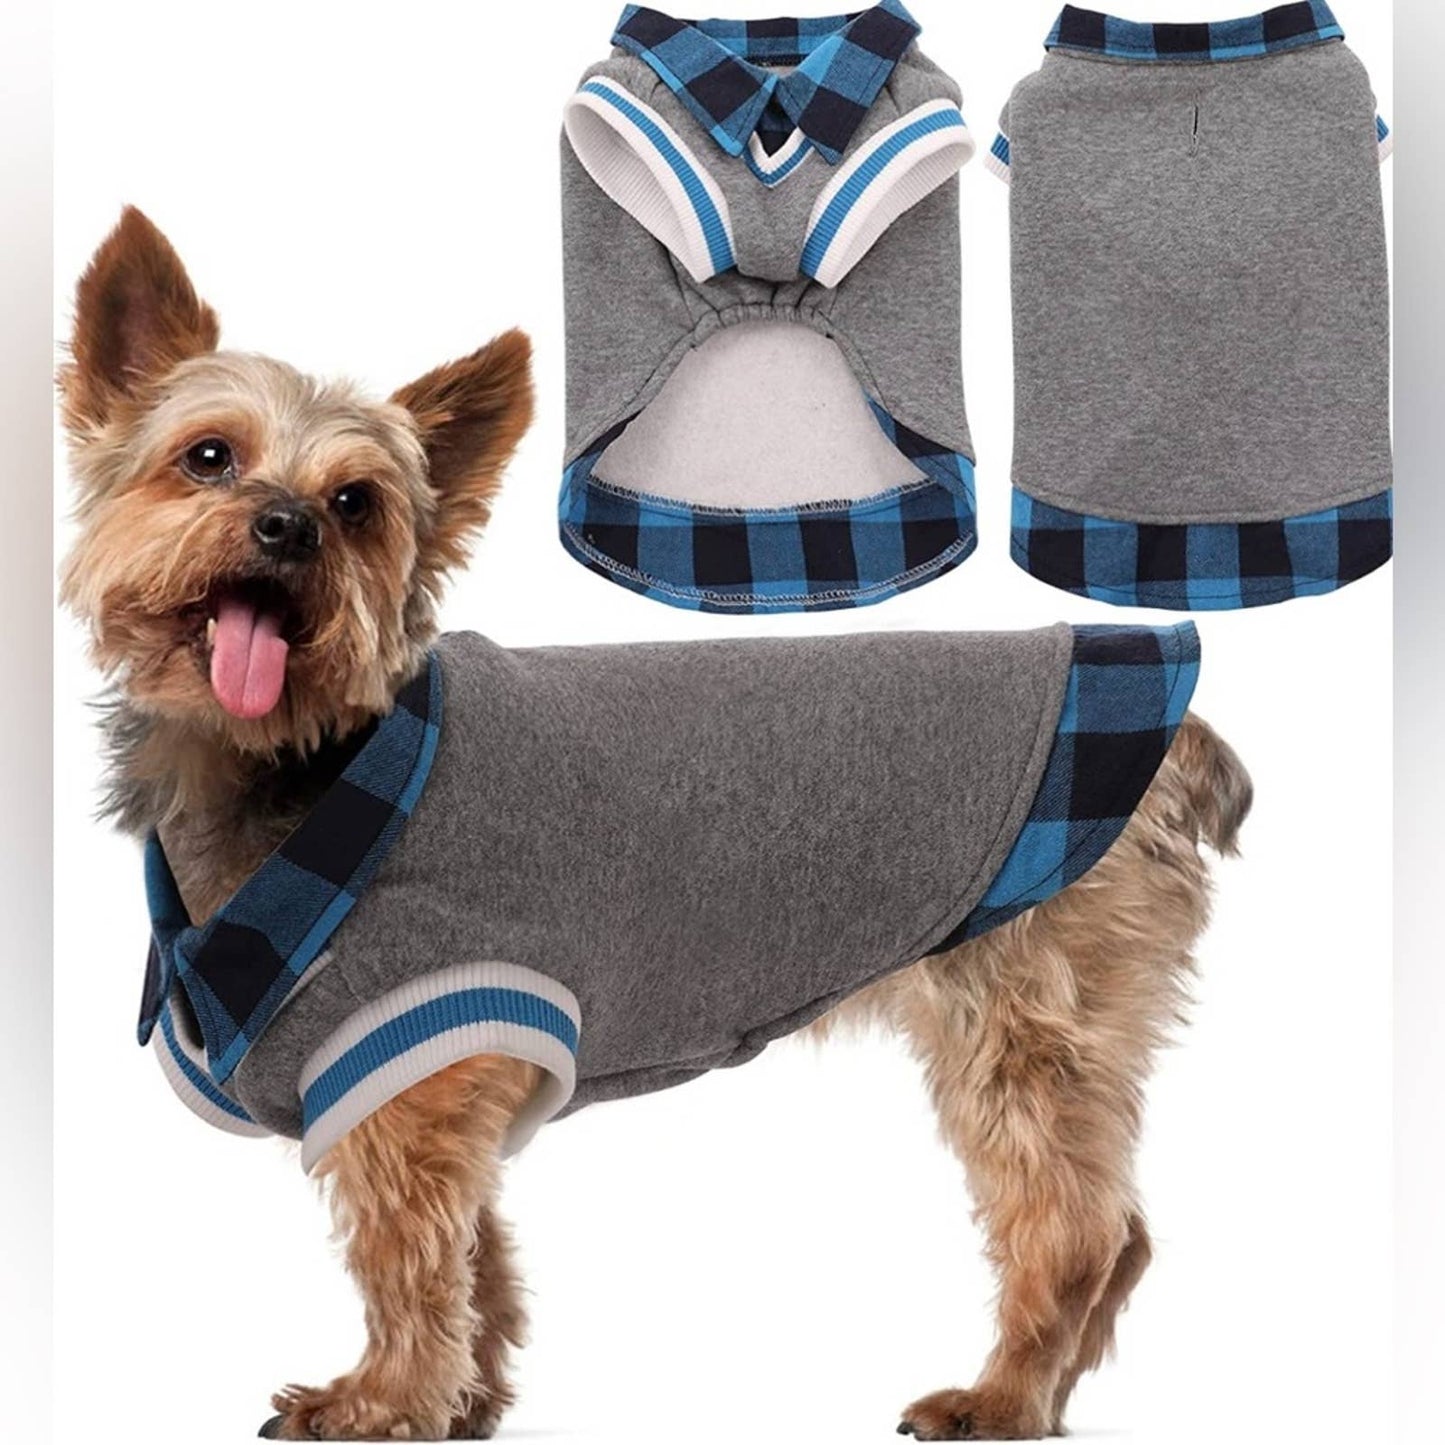 Dog Classic Plaid Sweaters British Style, Doggie Hoodie Pet Clothes, Size MD